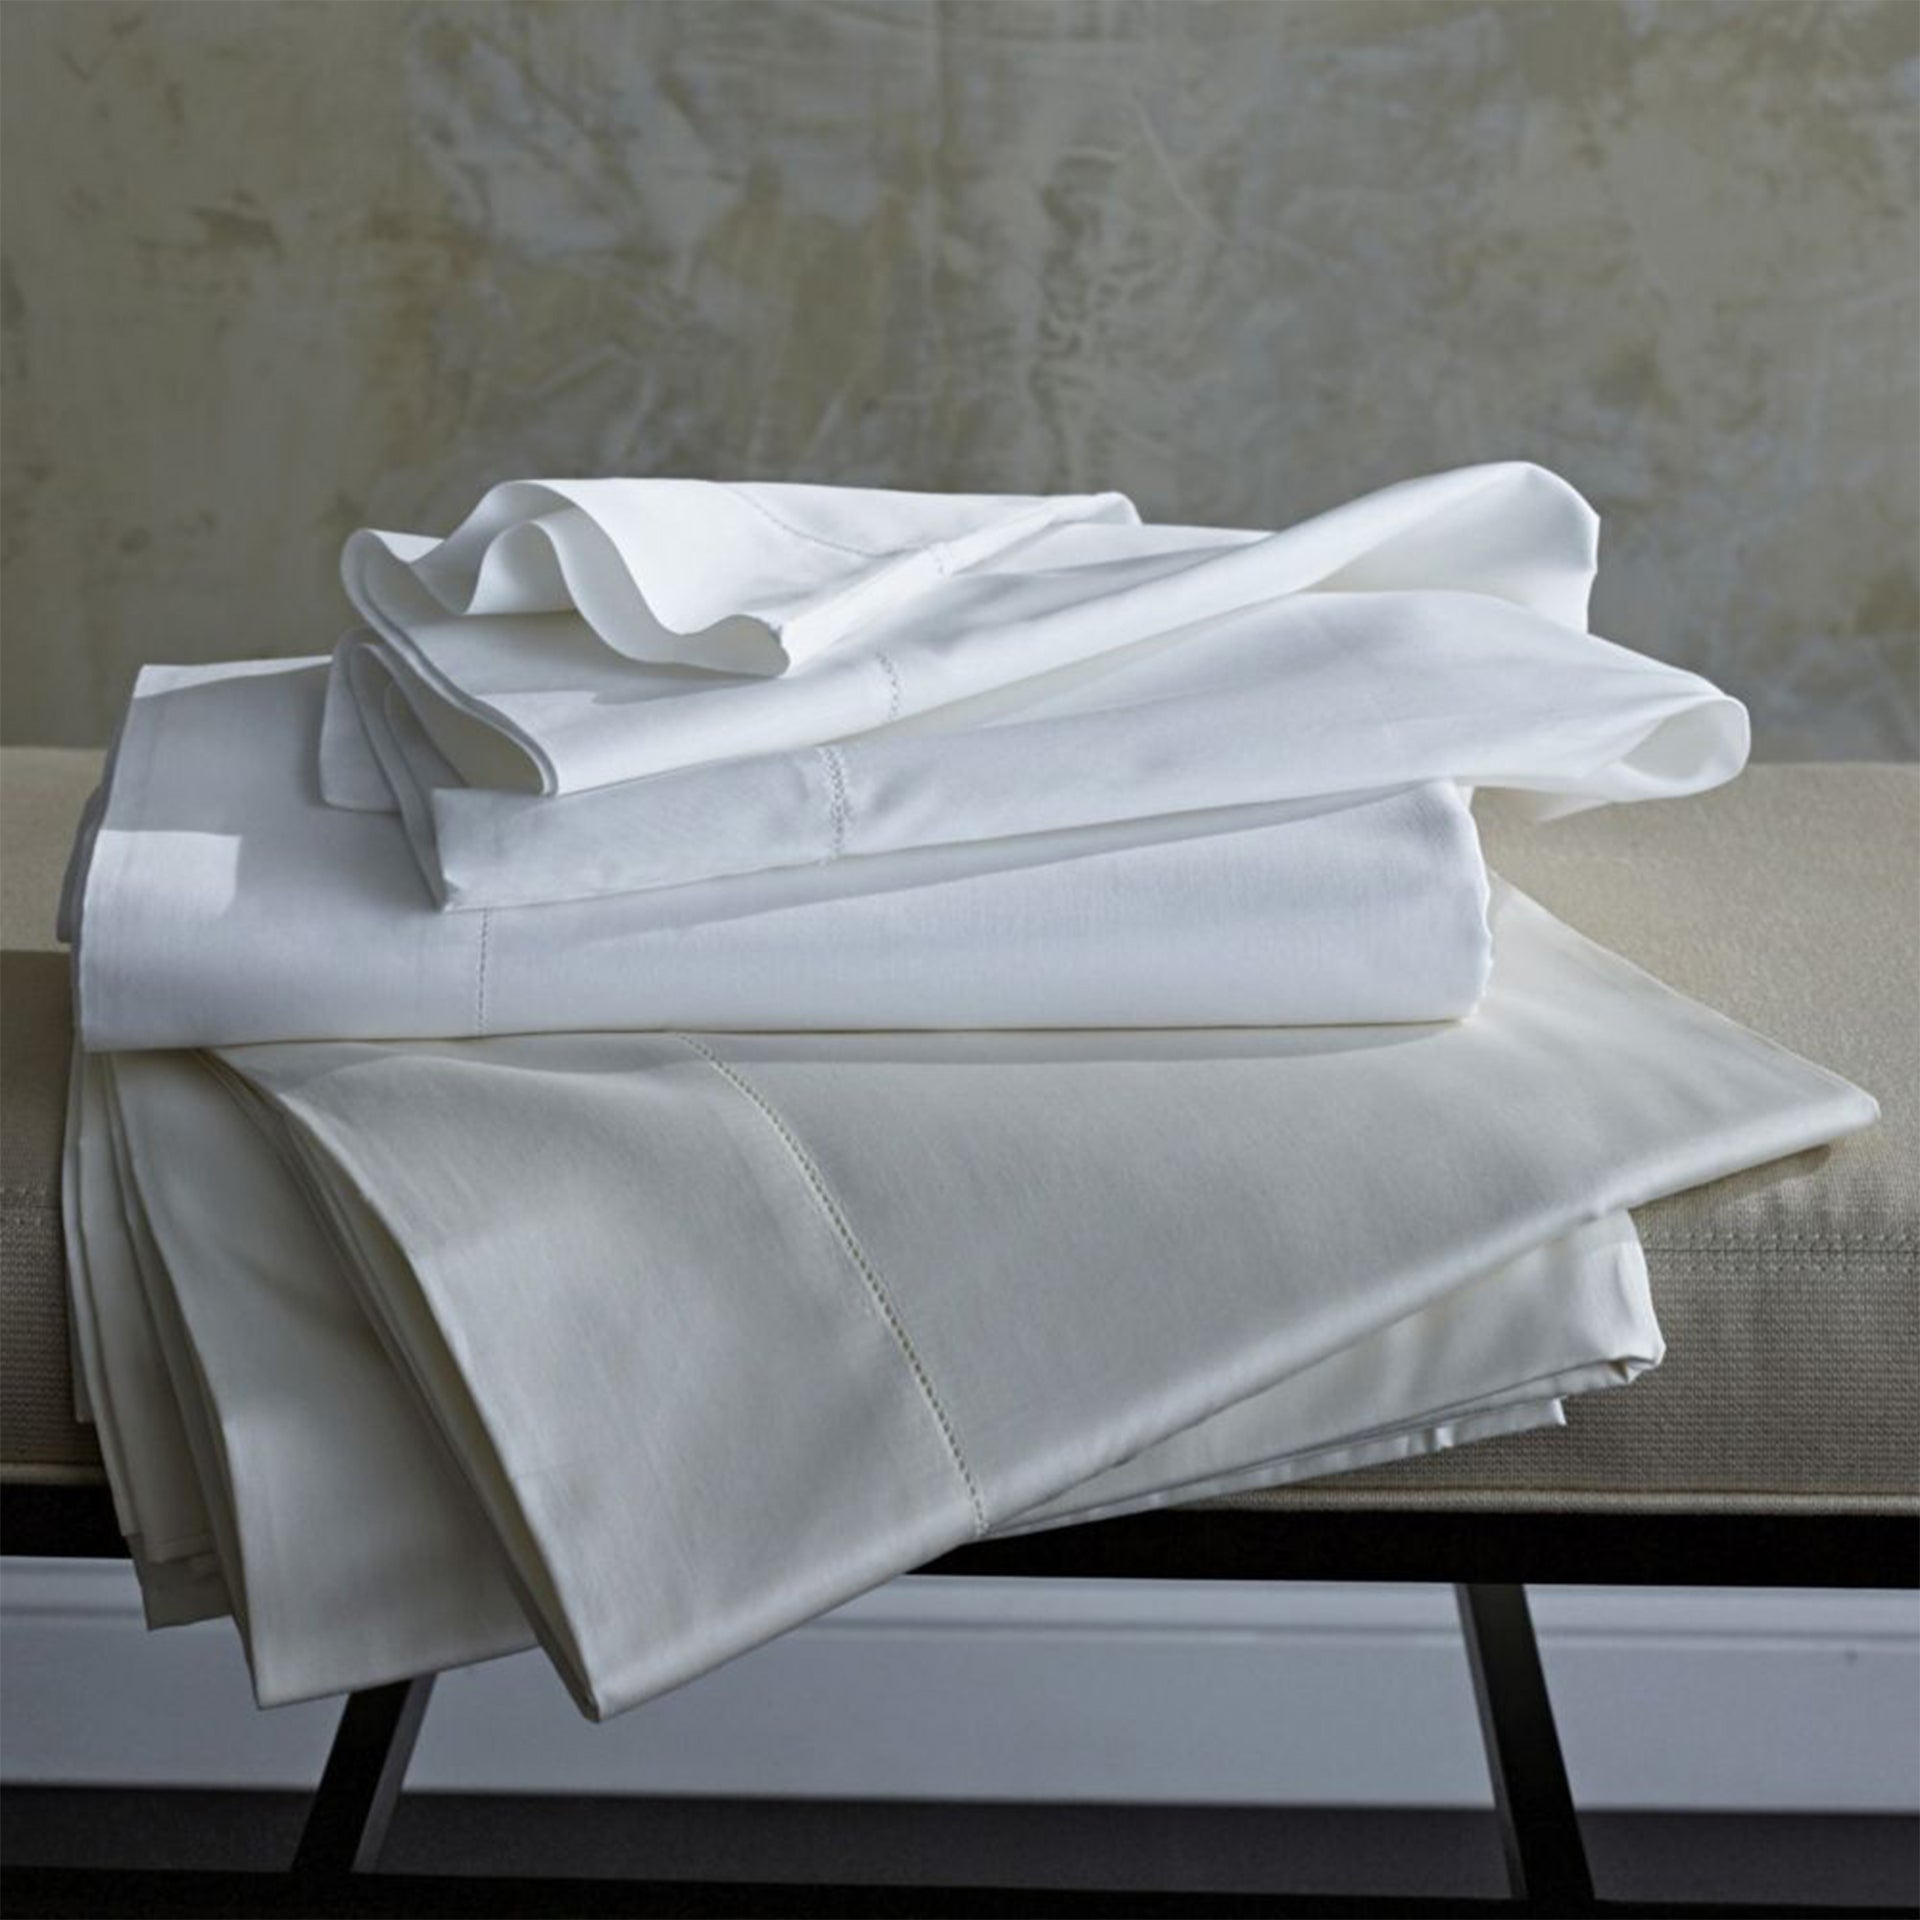 duvets offered in two classic colors-ivory and white. Features button closure and ribbon ties inside